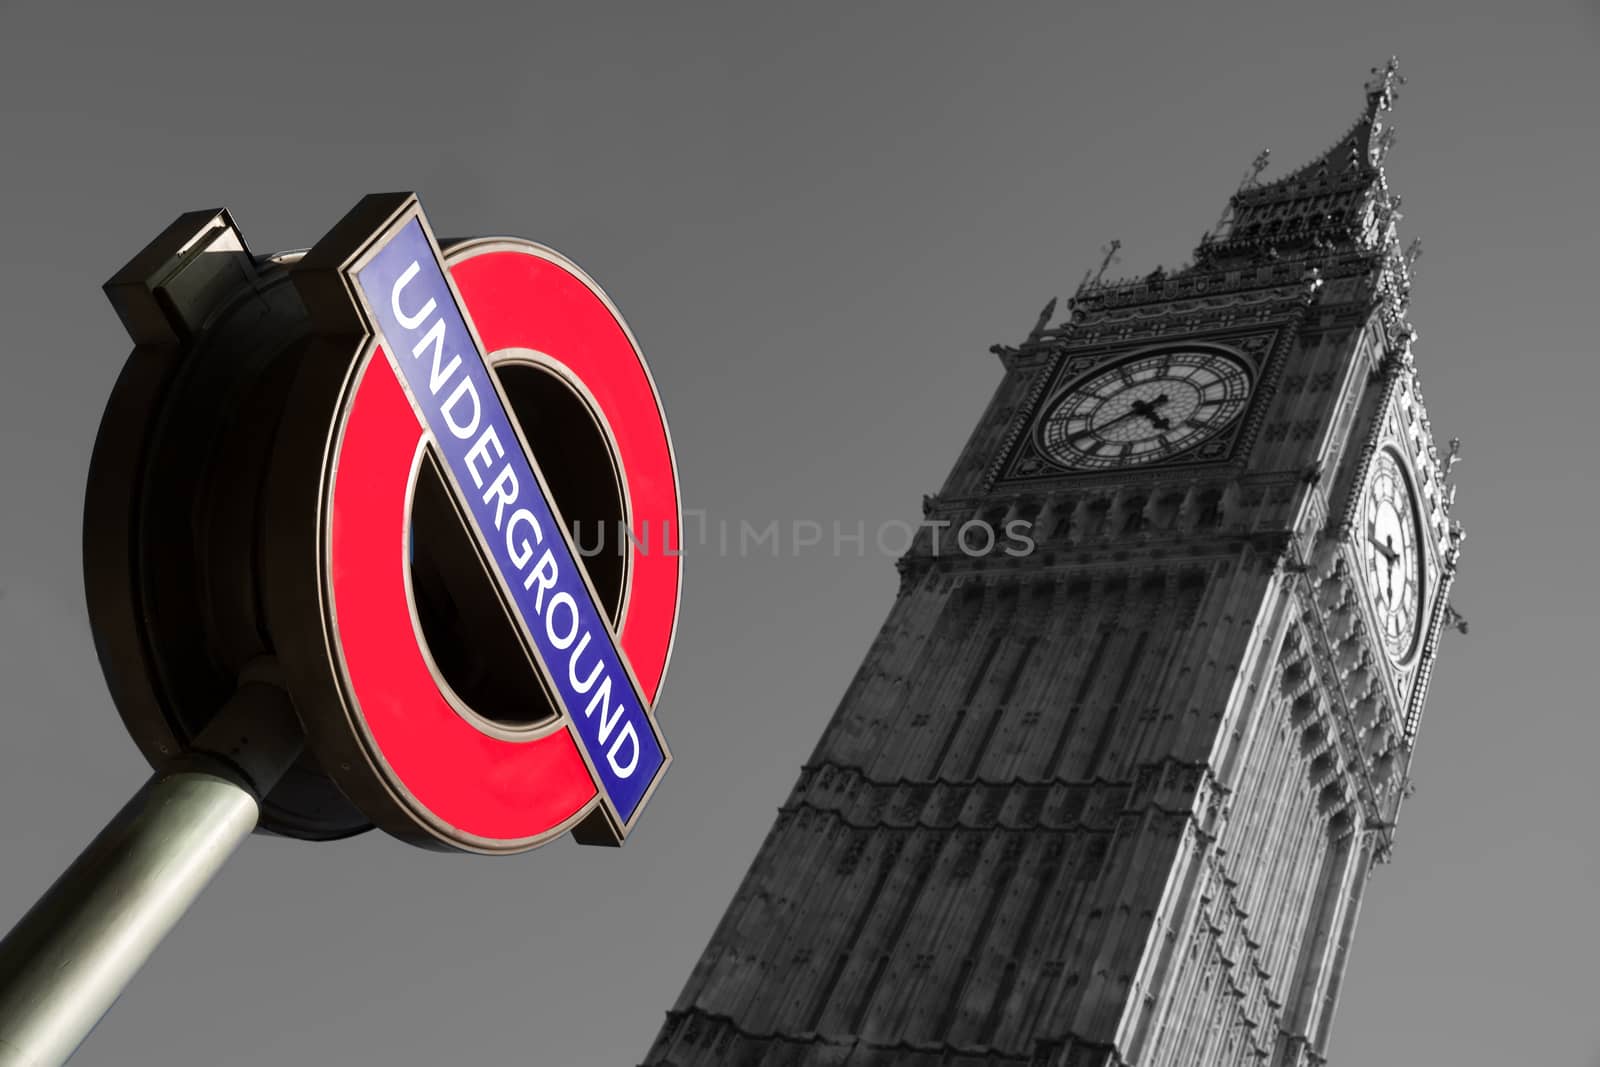 A black a white image of the palace of Westminster with a color image of the underground sign in the foreground